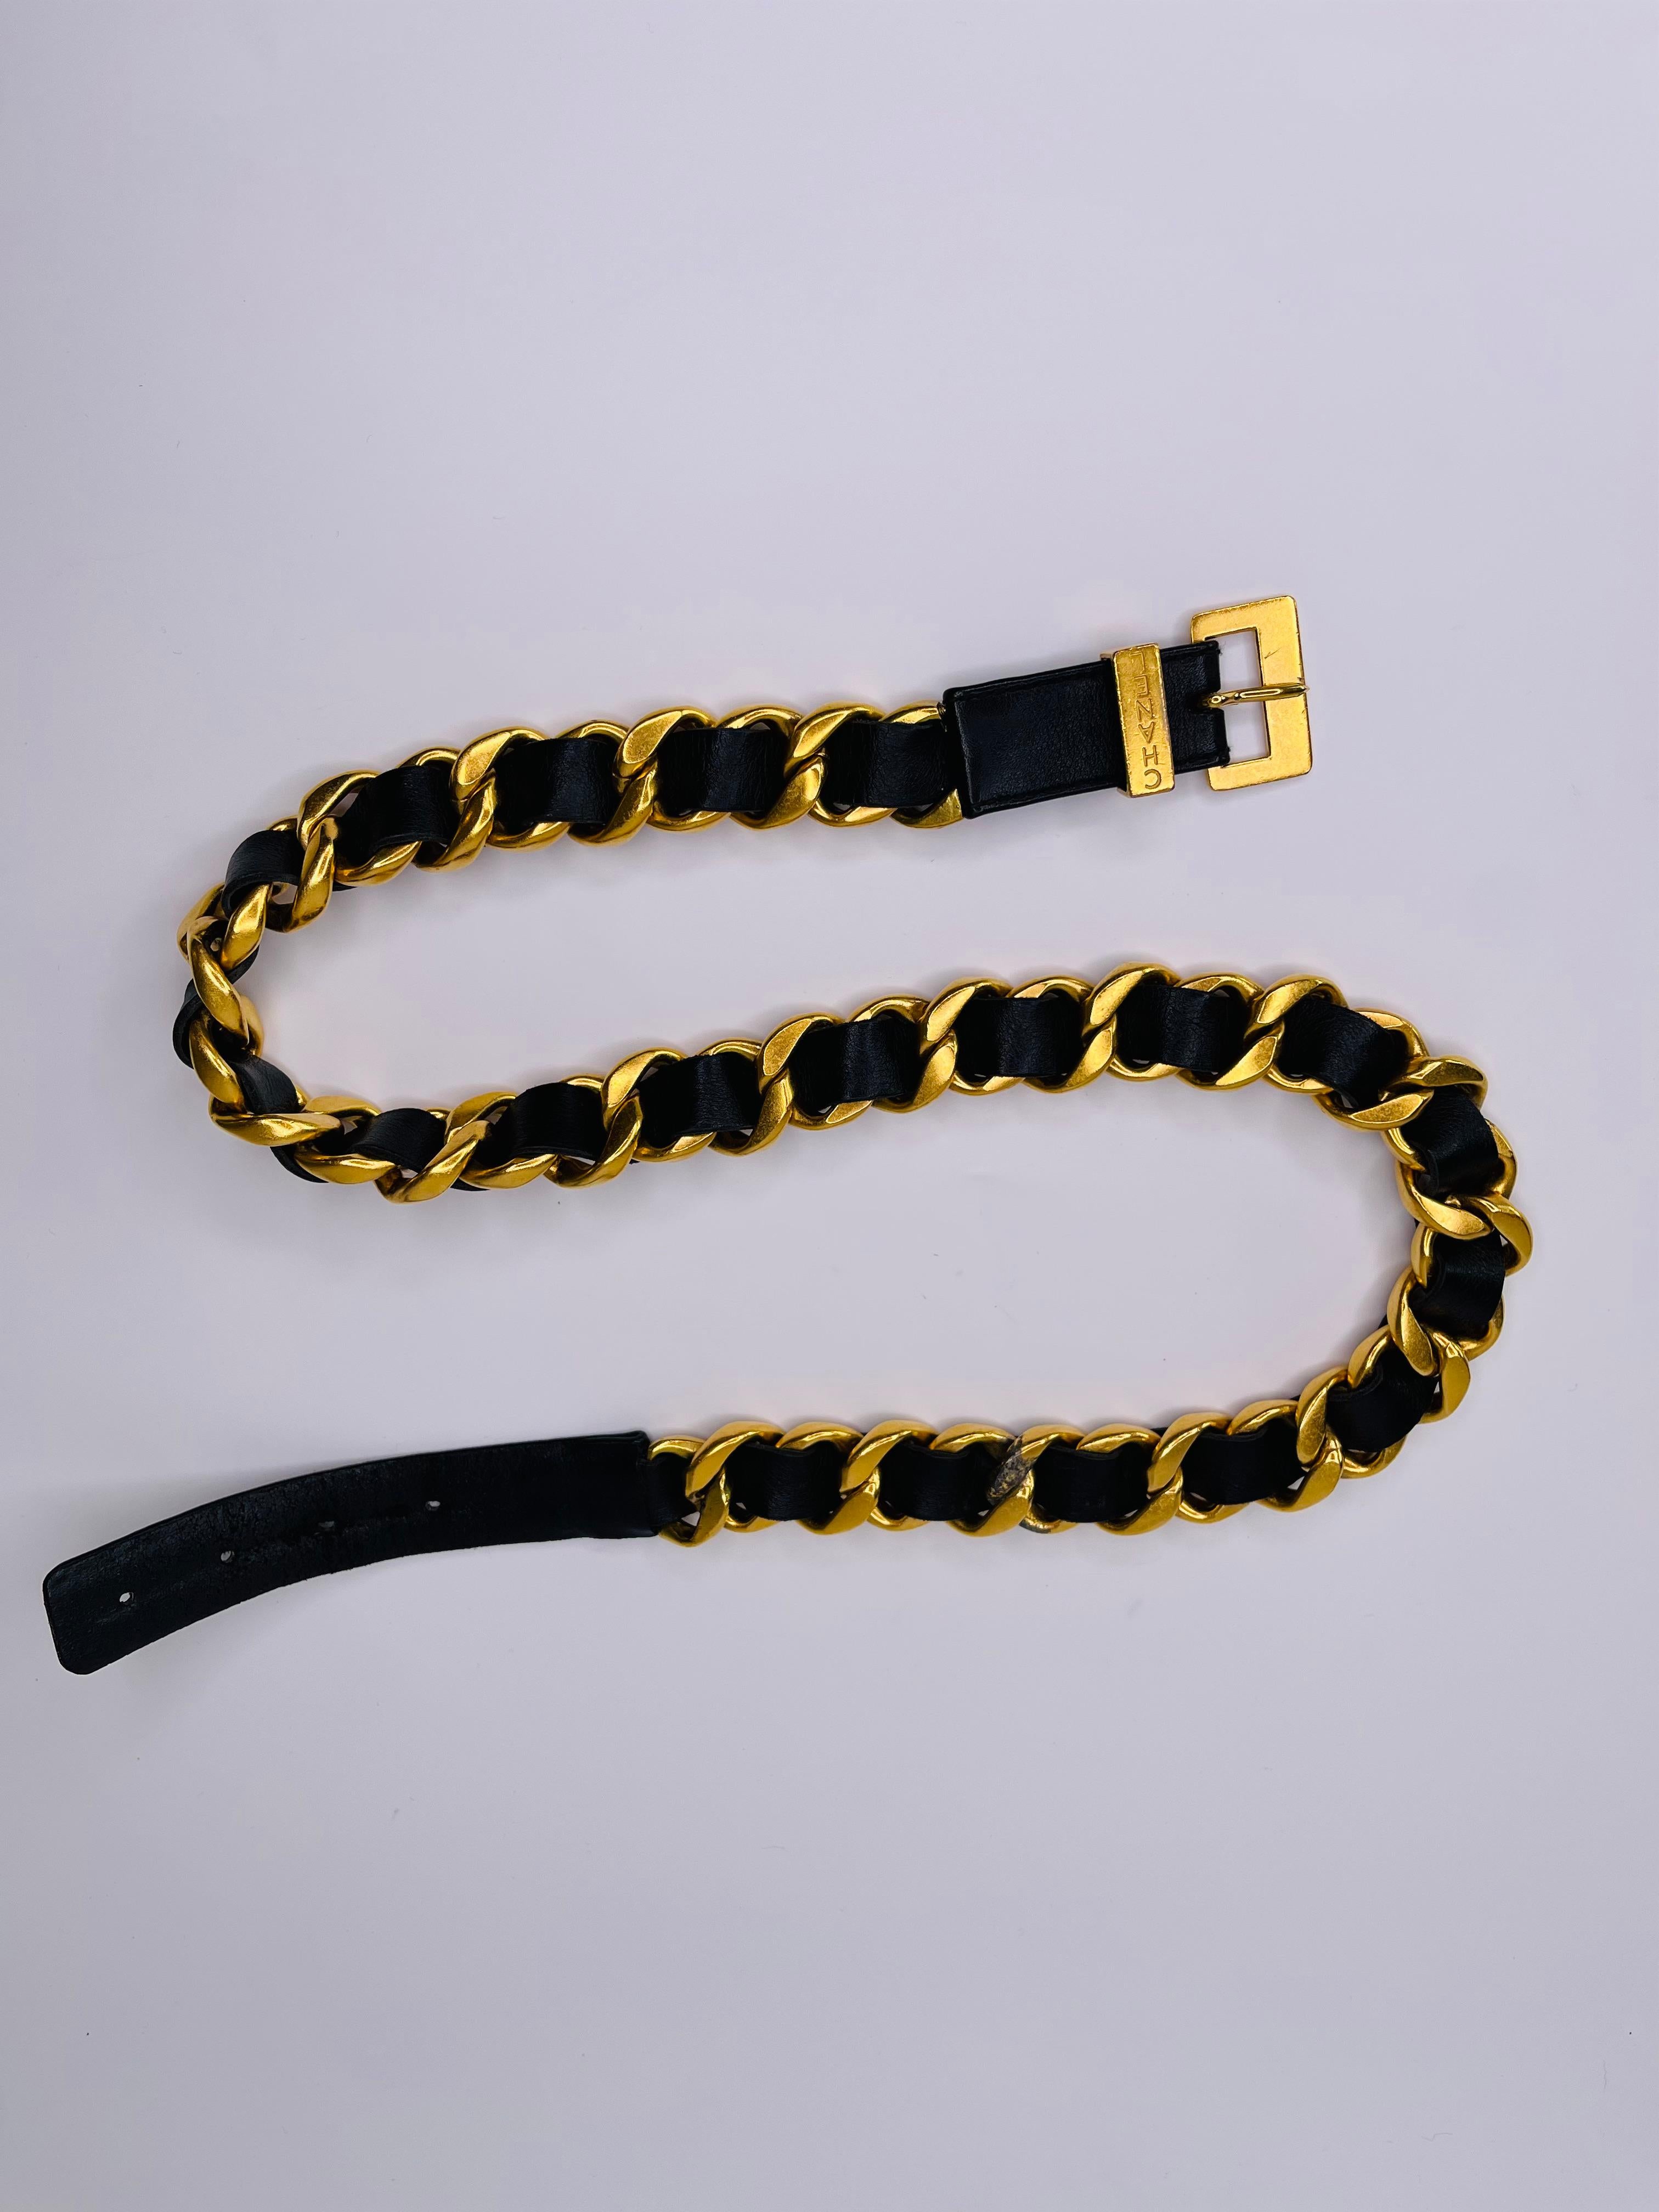 This Chanel Vintage Chain and Leather Belt is a beautiful design with leather interwoven through the gold chain. Chanel written logo is located on part of the fastener. Fair condition, comes with a dust bag. Vintage item, no item code. 

COLOR: